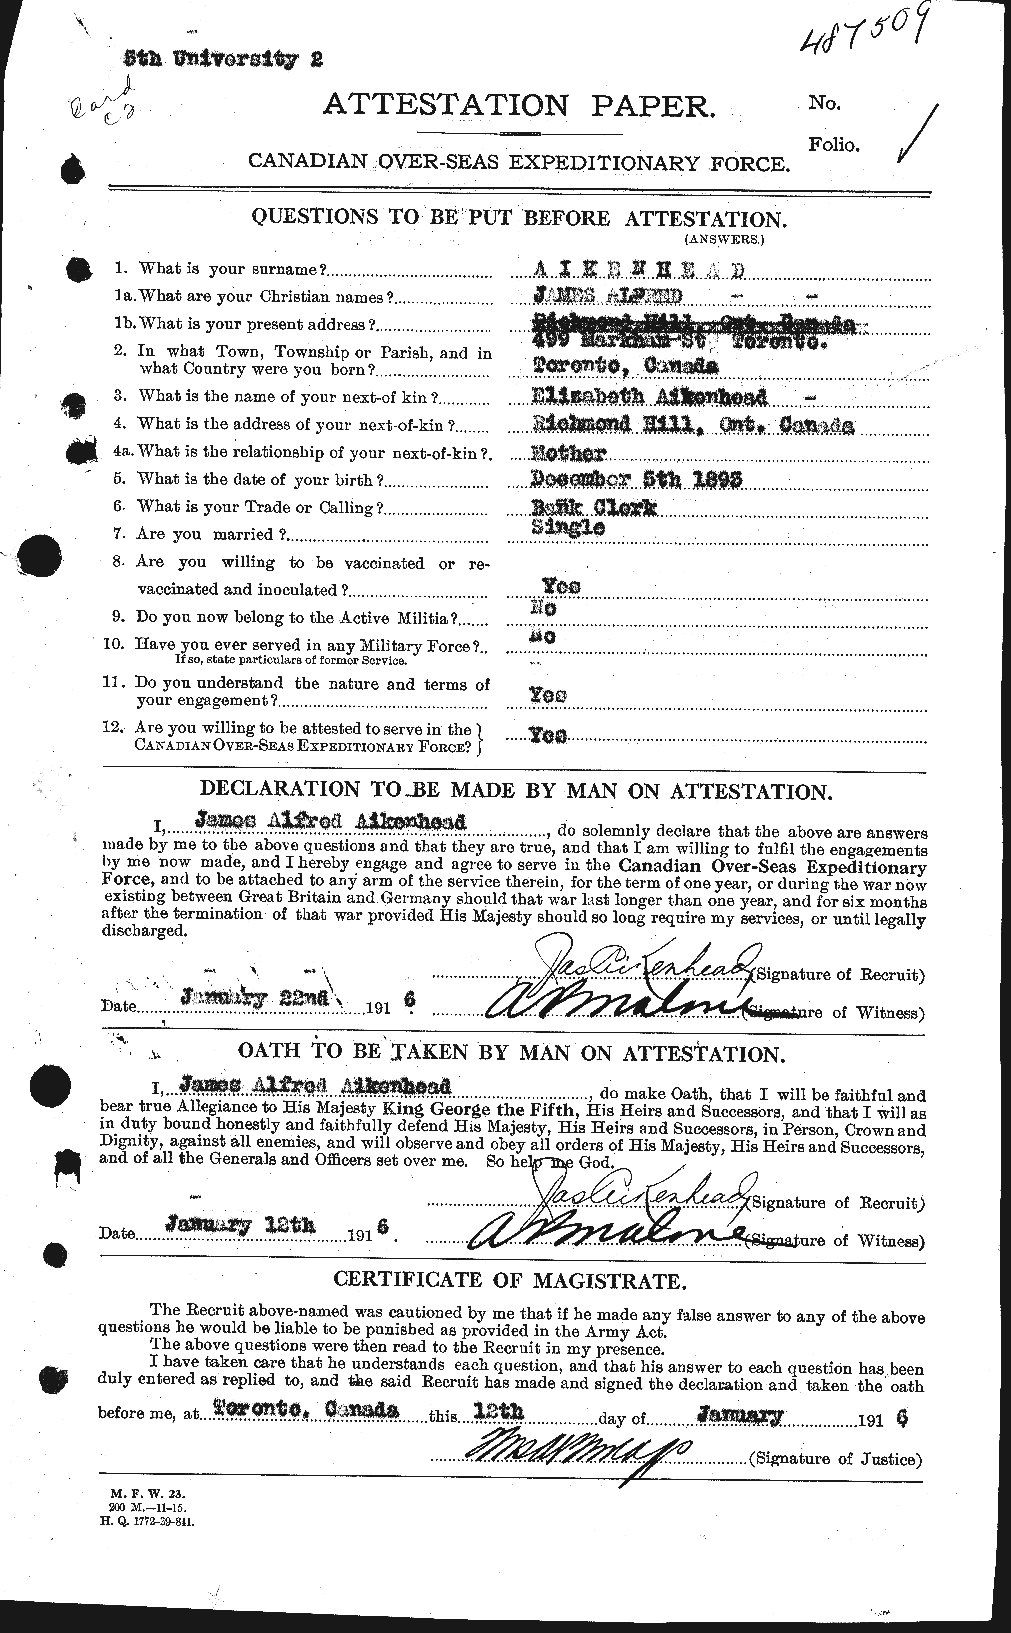 Personnel Records of the First World War - CEF 204131a